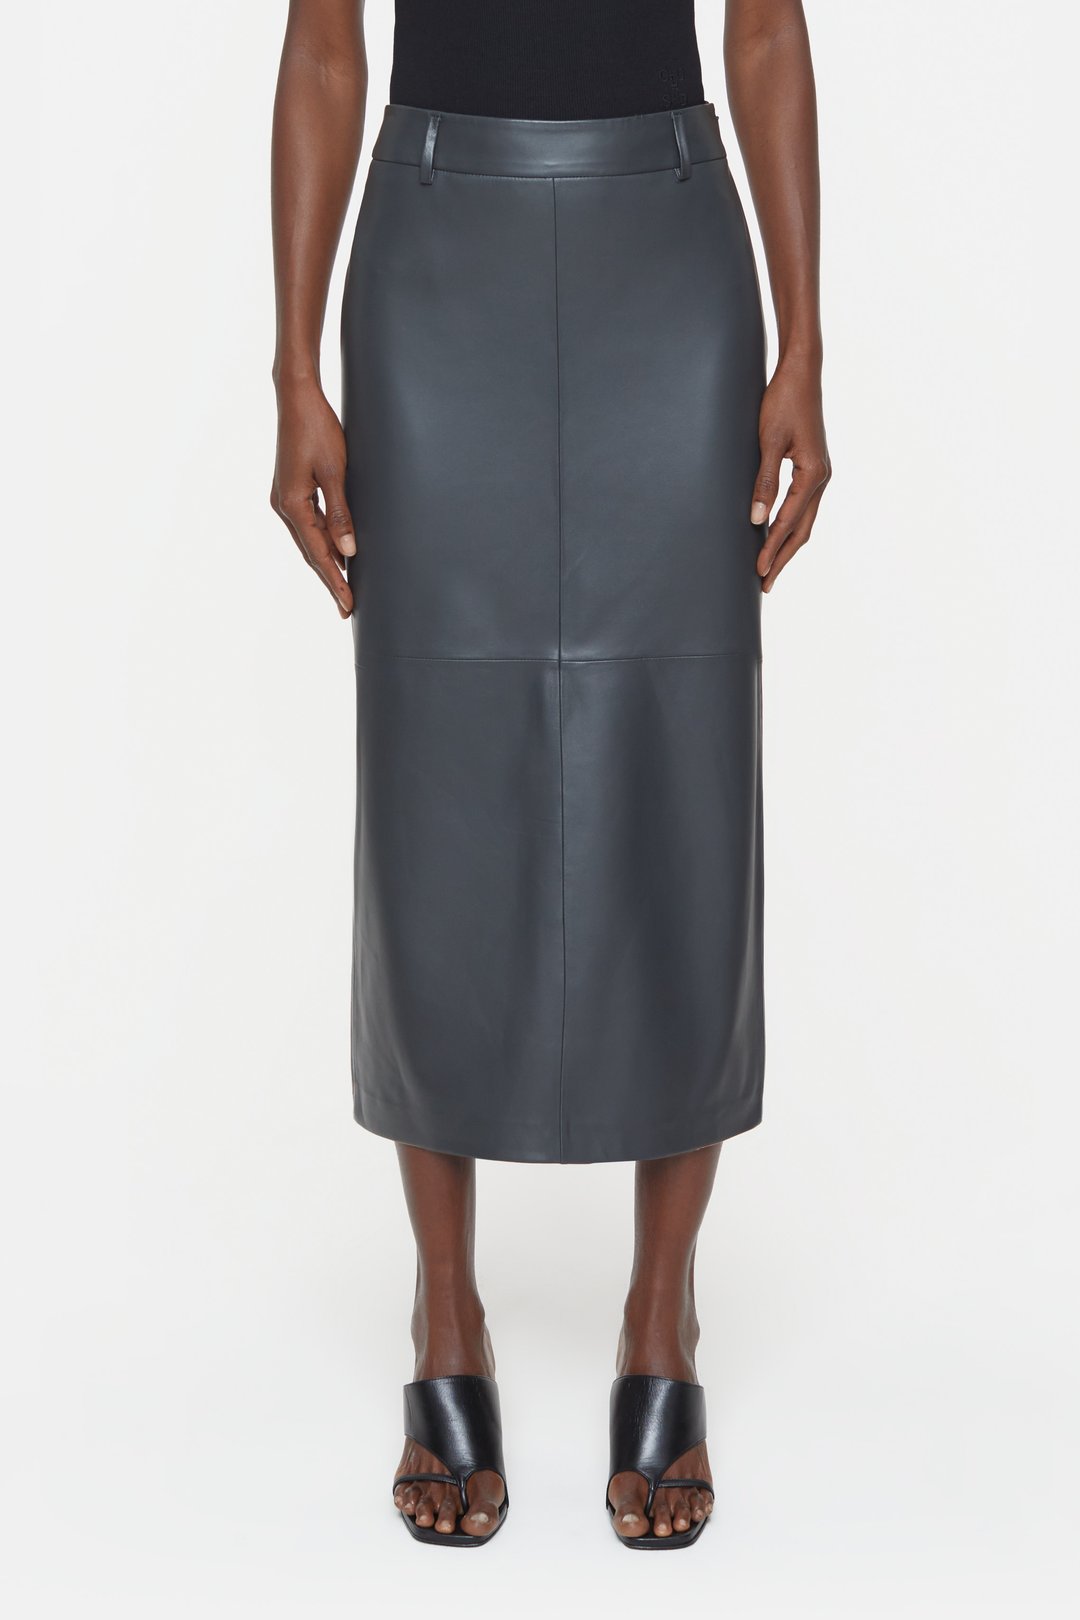 NAPPA LEATHER SKIRT | CLOSED